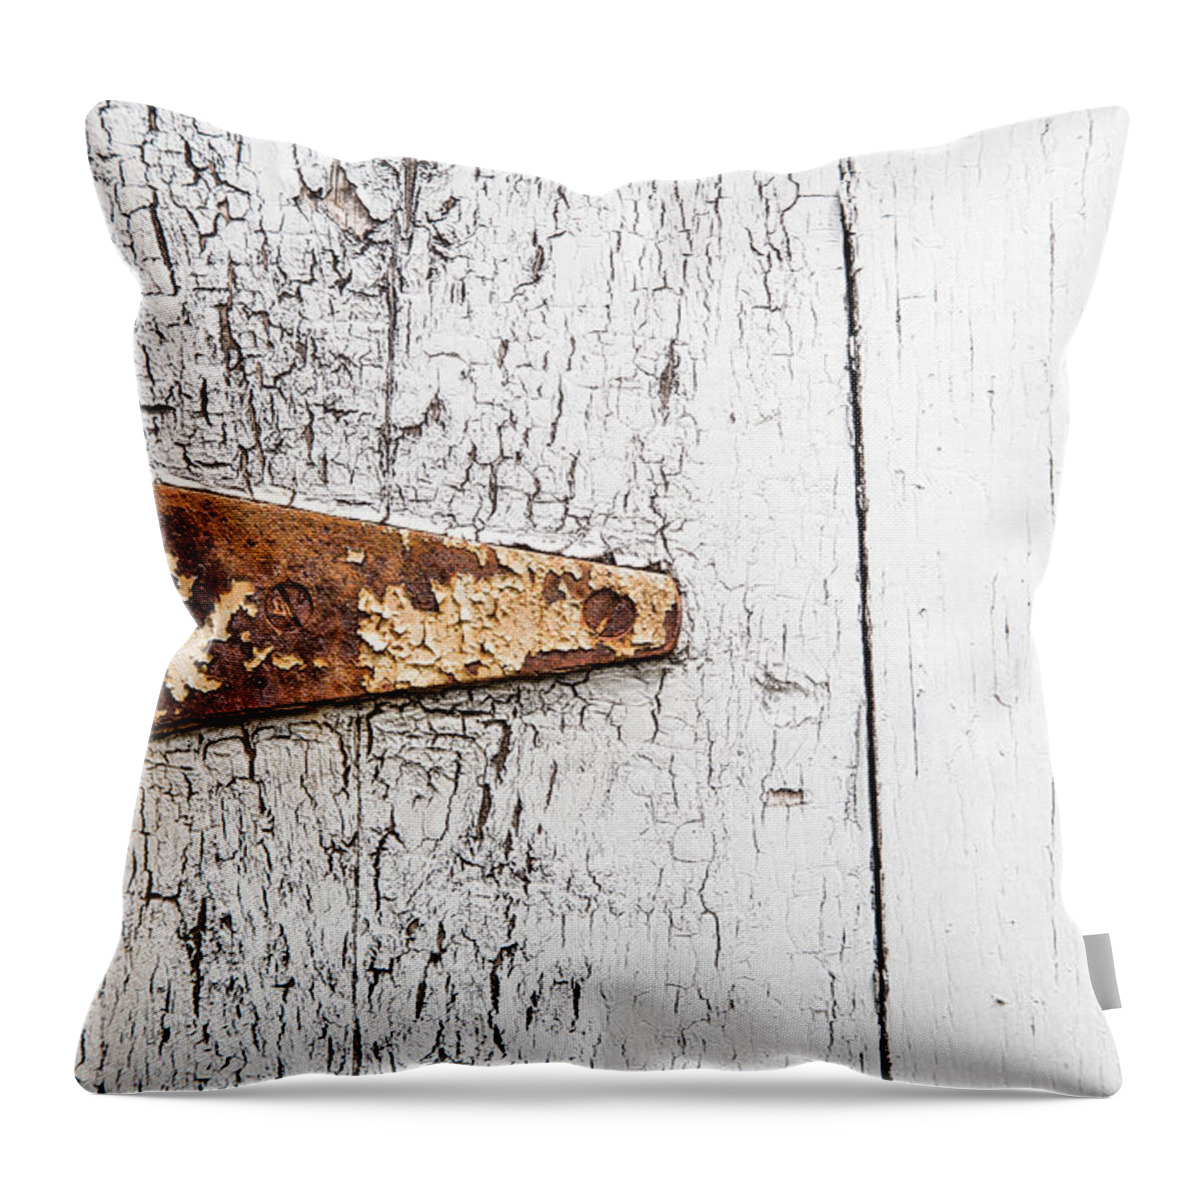 Hinge Throw Pillow featuring the photograph Hinge by Karol Livote